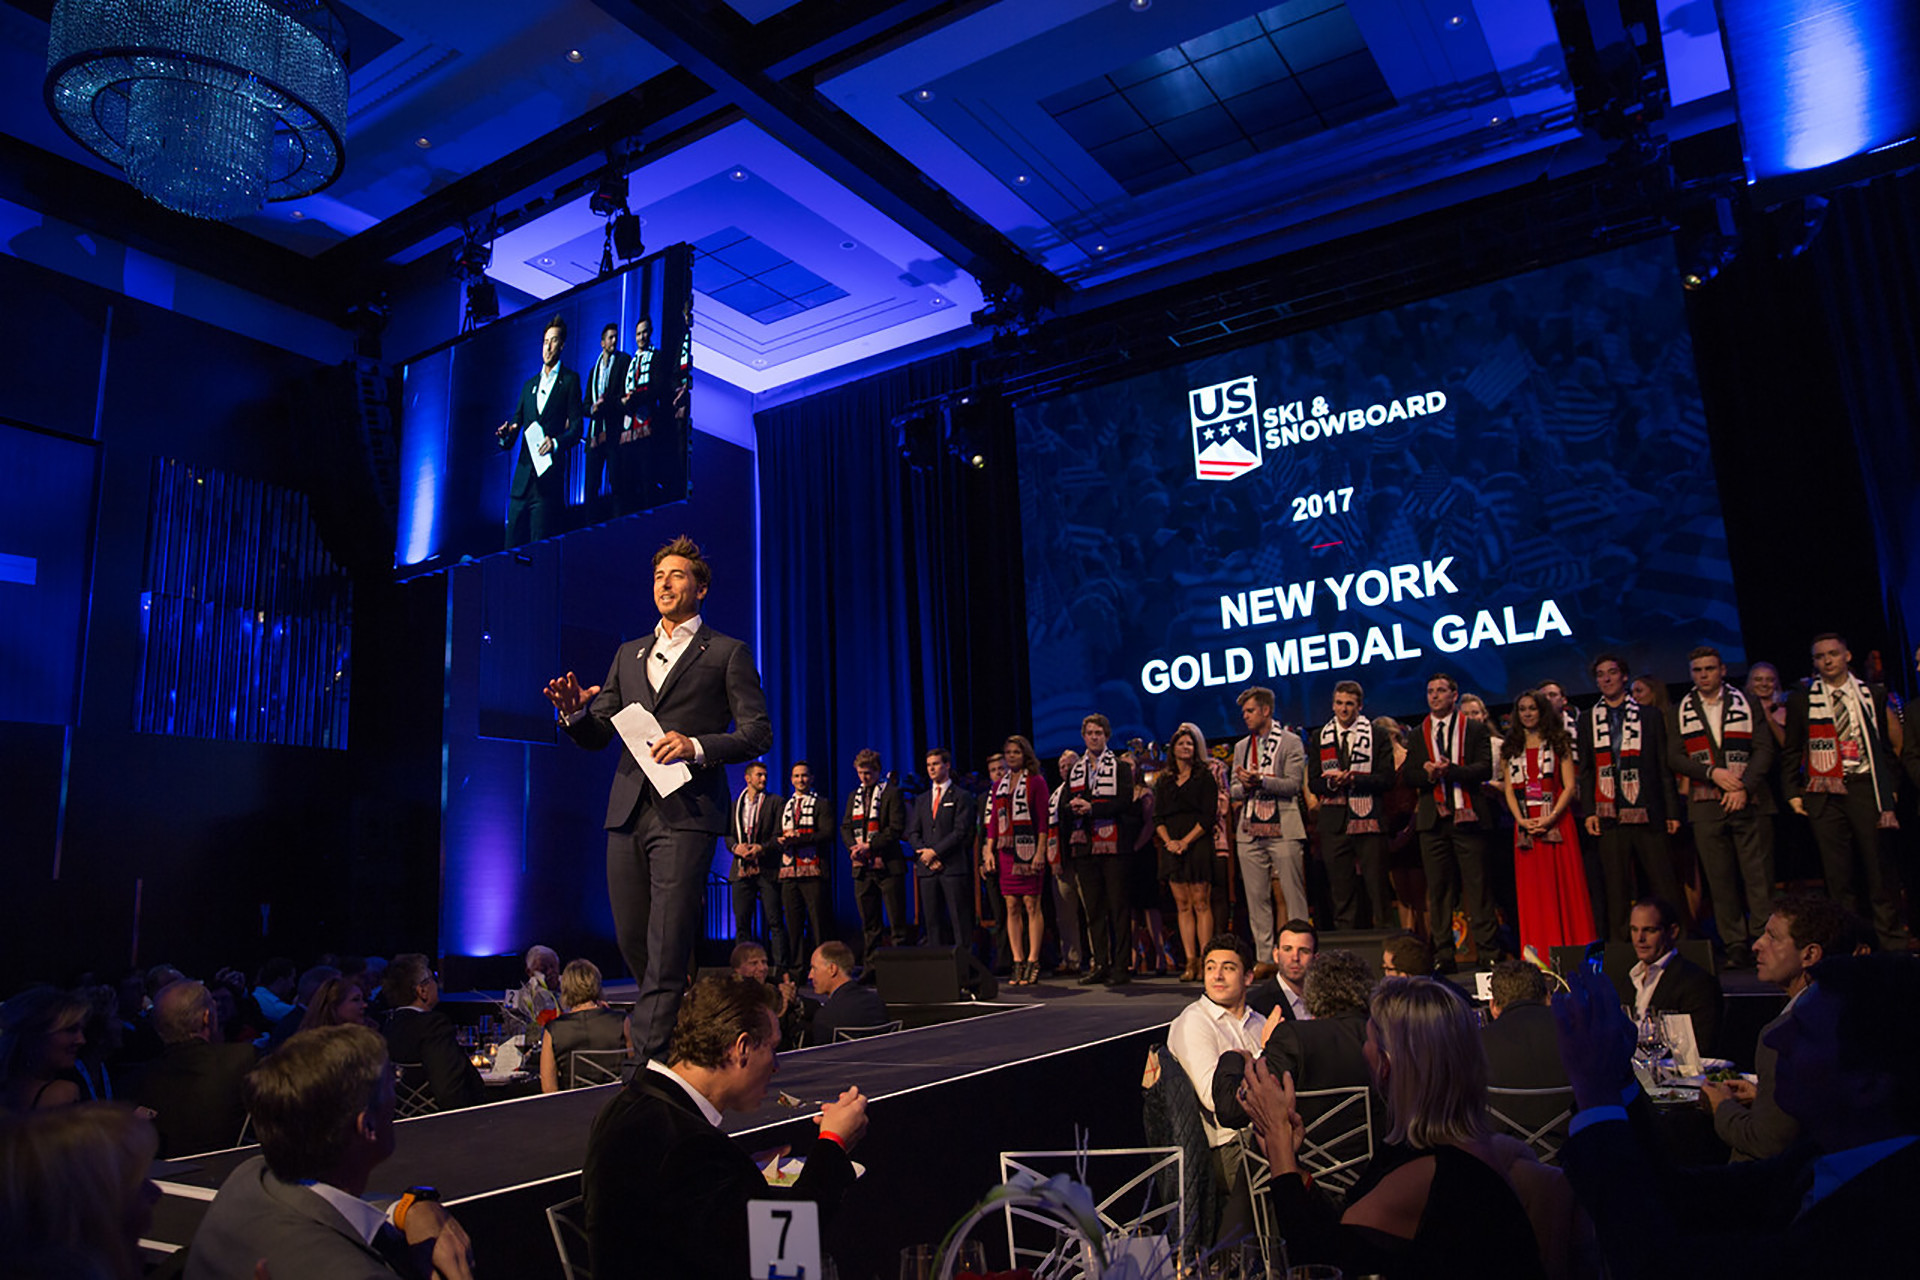 The New York Gold Medal Gala is an important fundraising event that is held annually ©US Ski and Snowboard 